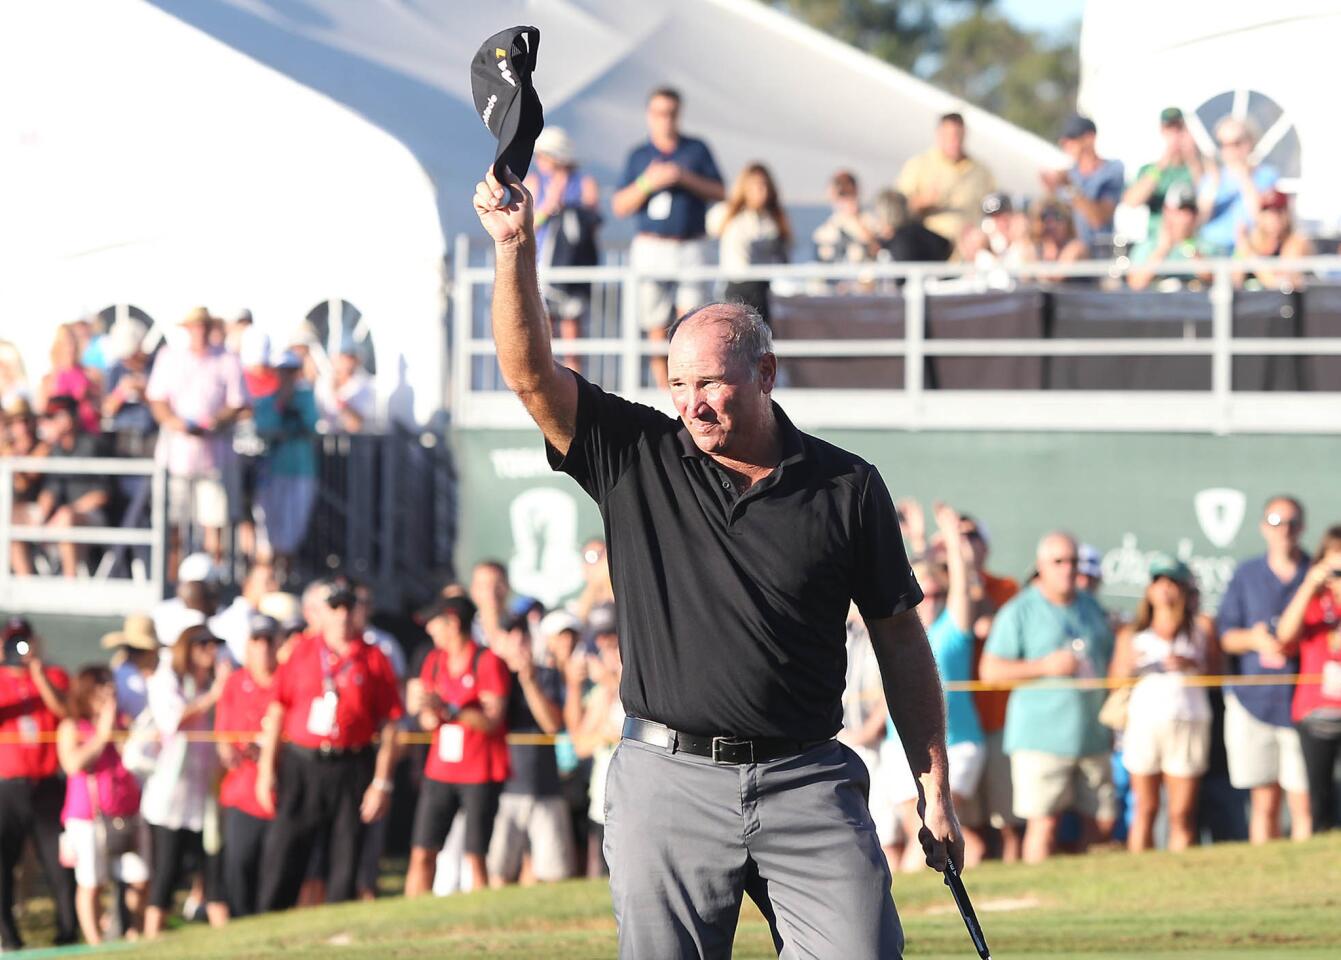 Duffy Waldorf salutes the gallery on the 18th green after winning the Toshiba Classic at the Newport Beach Country Club on Sunday.